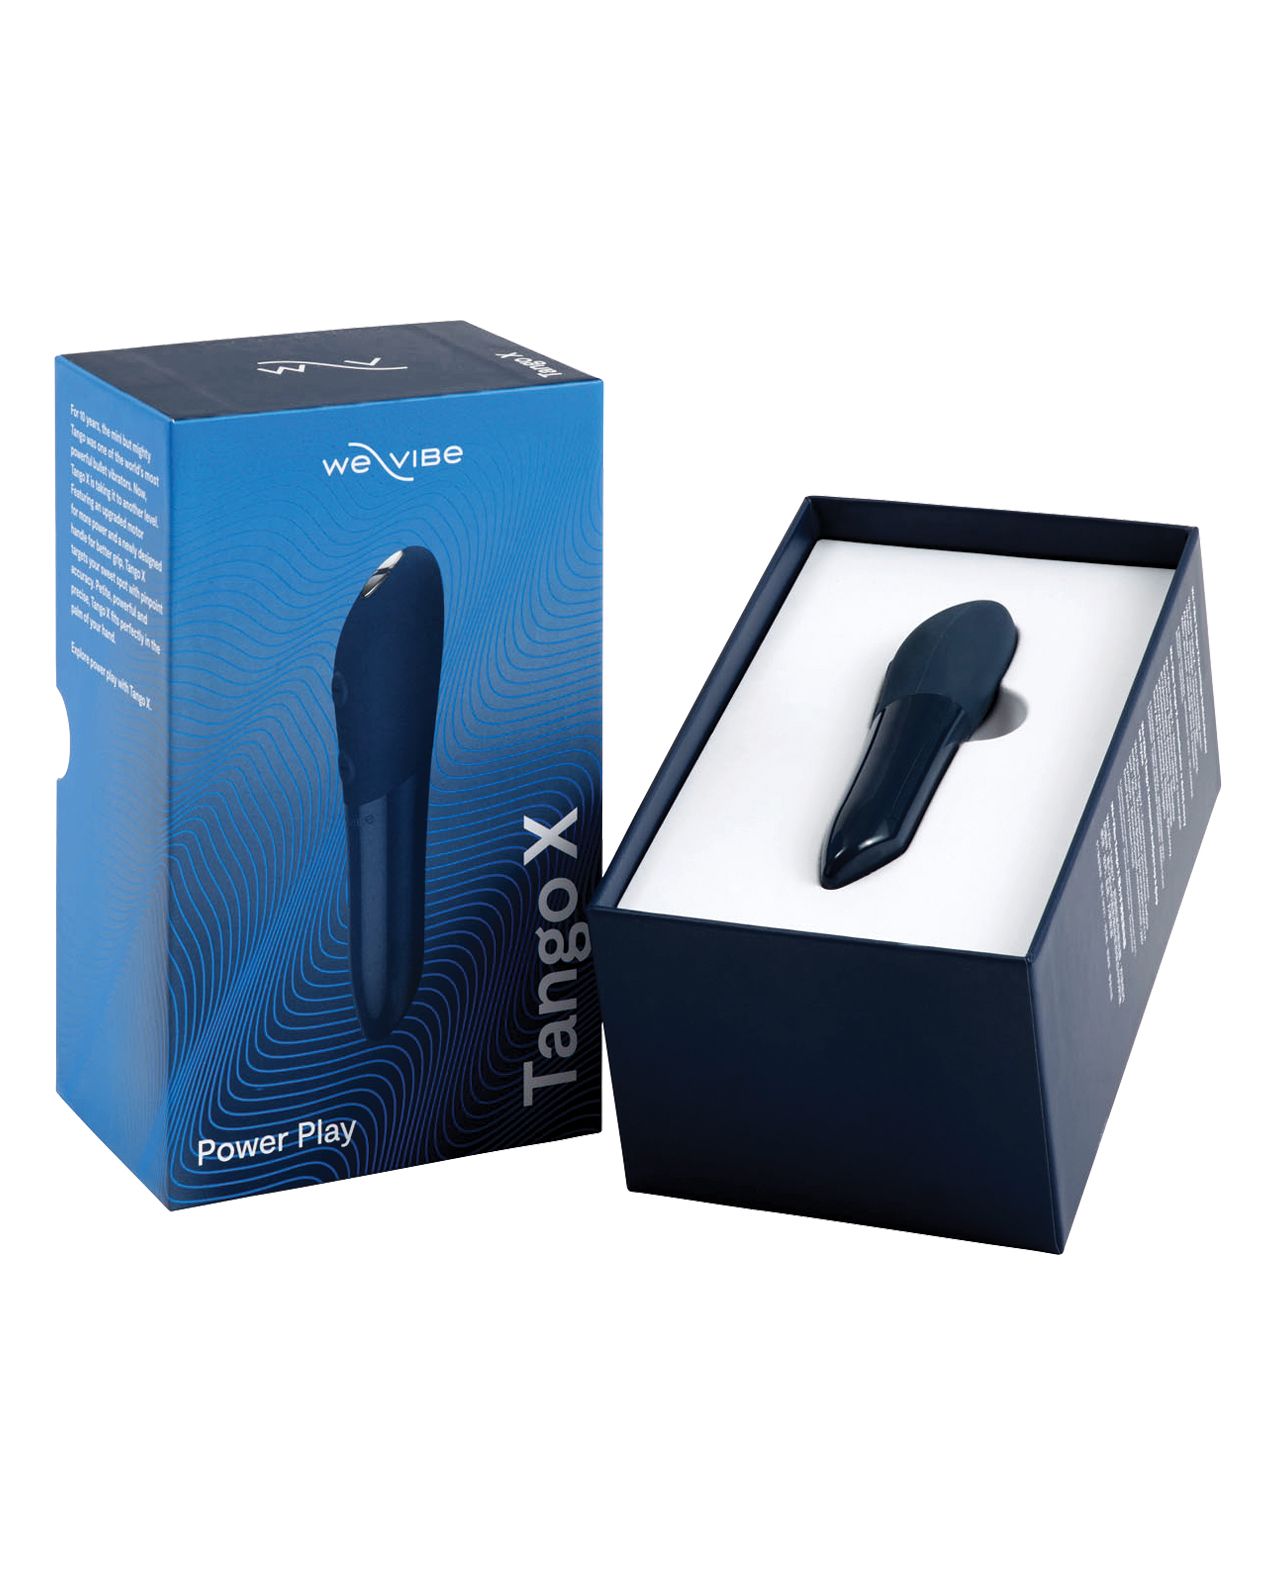 We-Vibe Tango X (midnight blue) in box with the lid off.